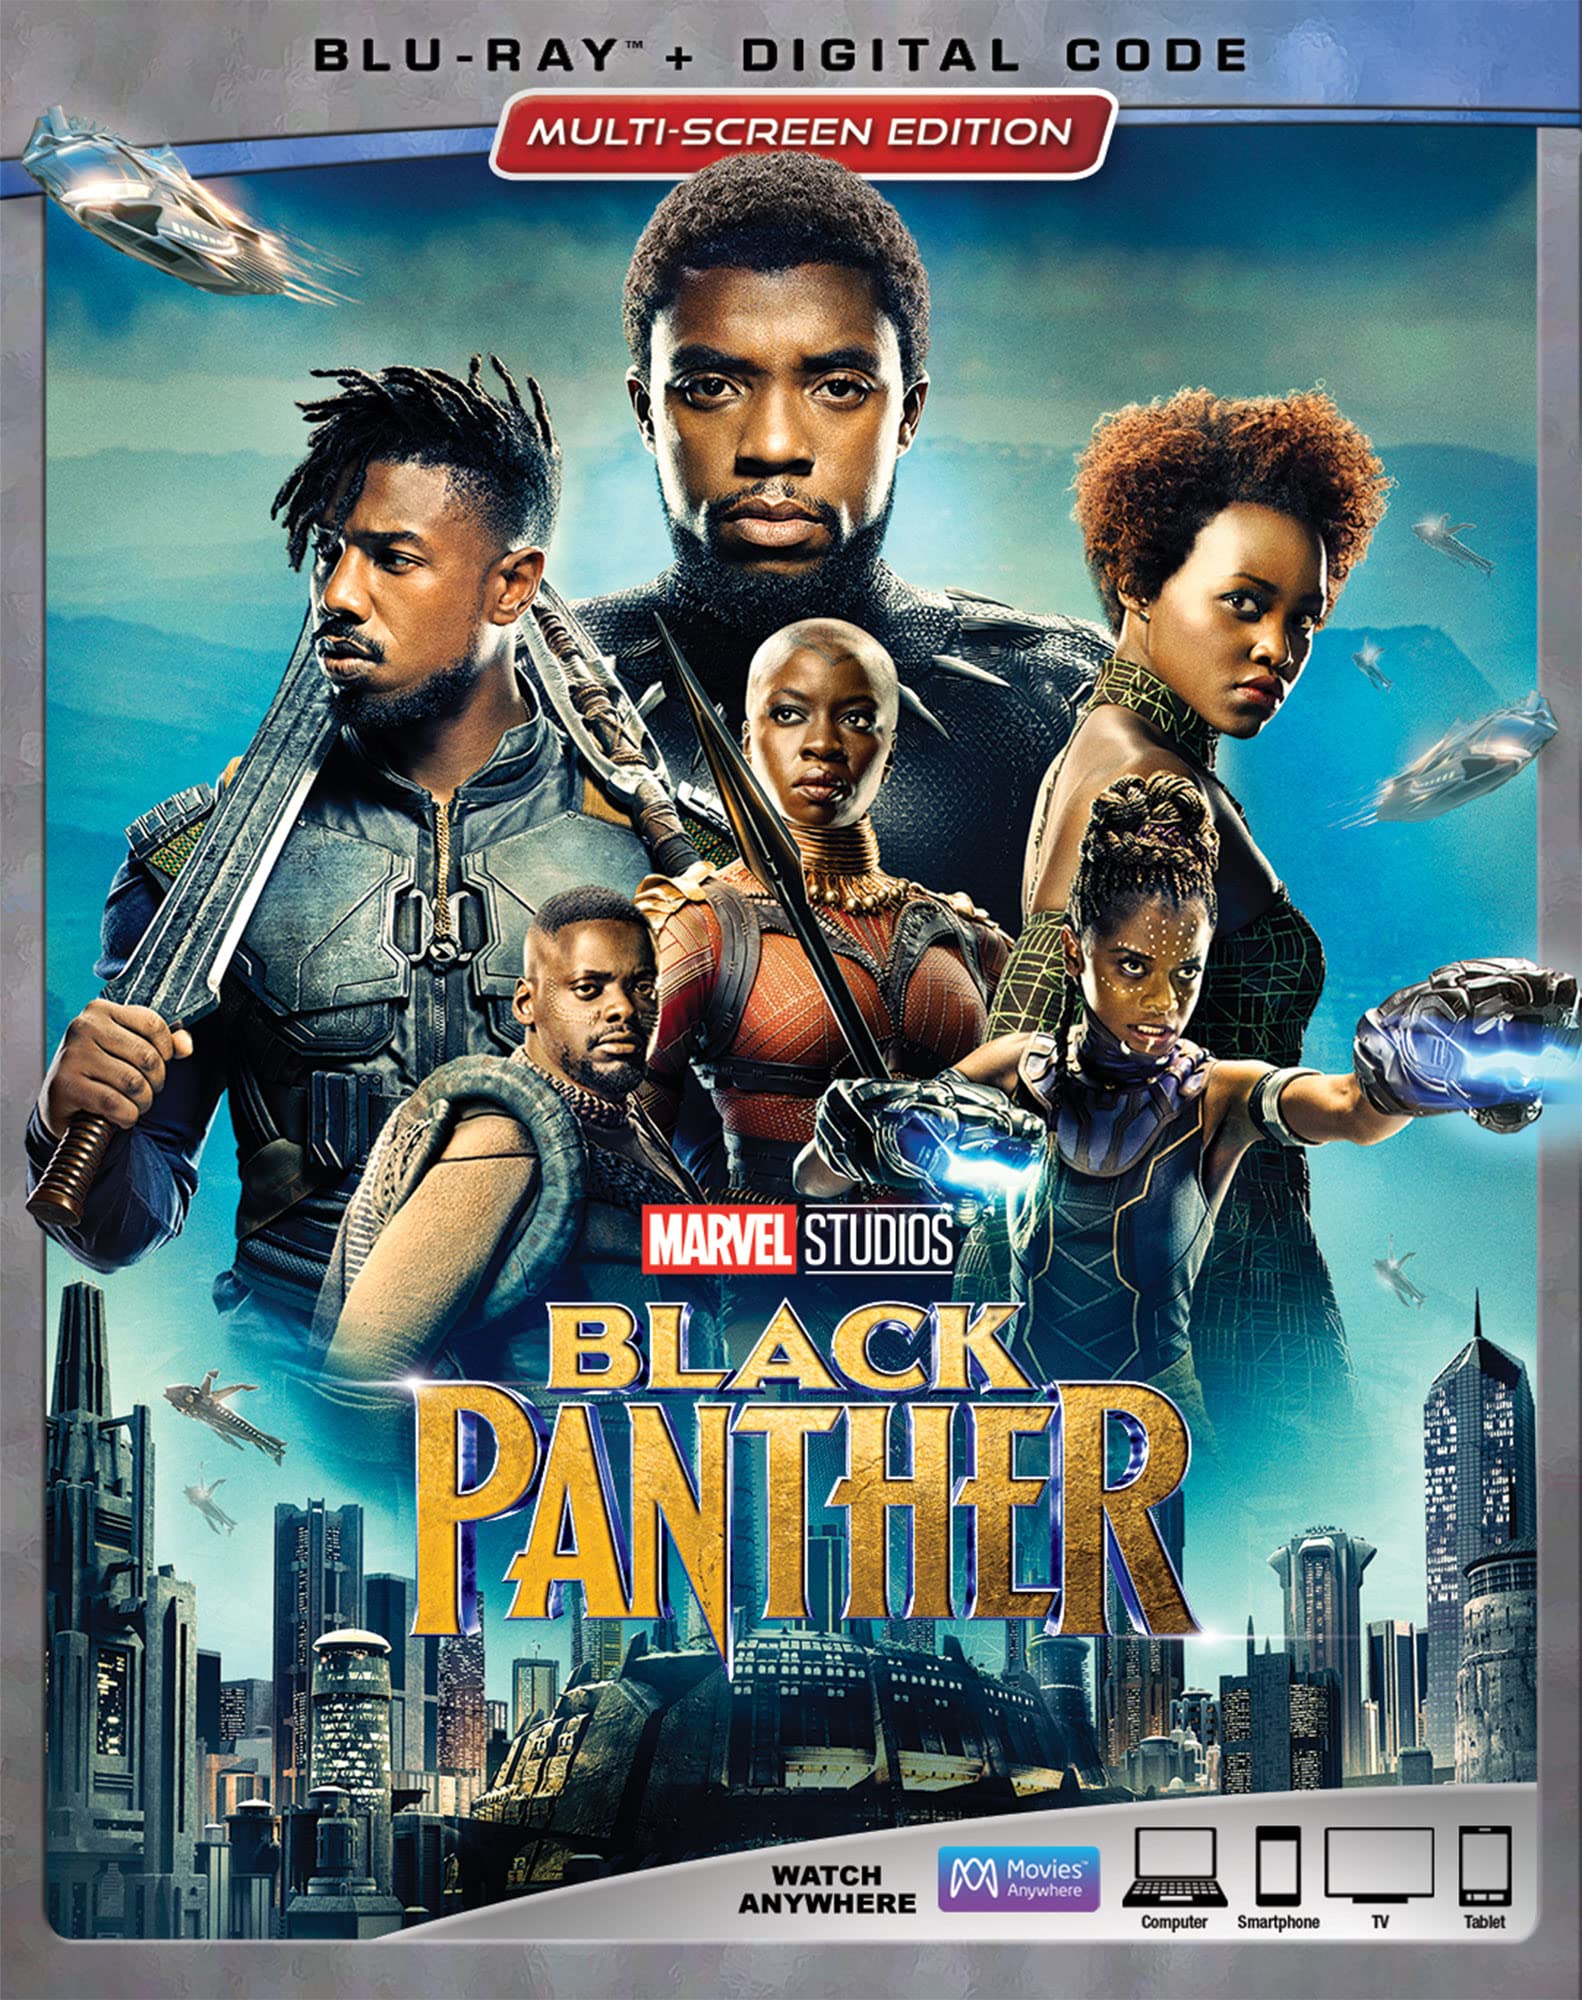 Black Panther (Feature)